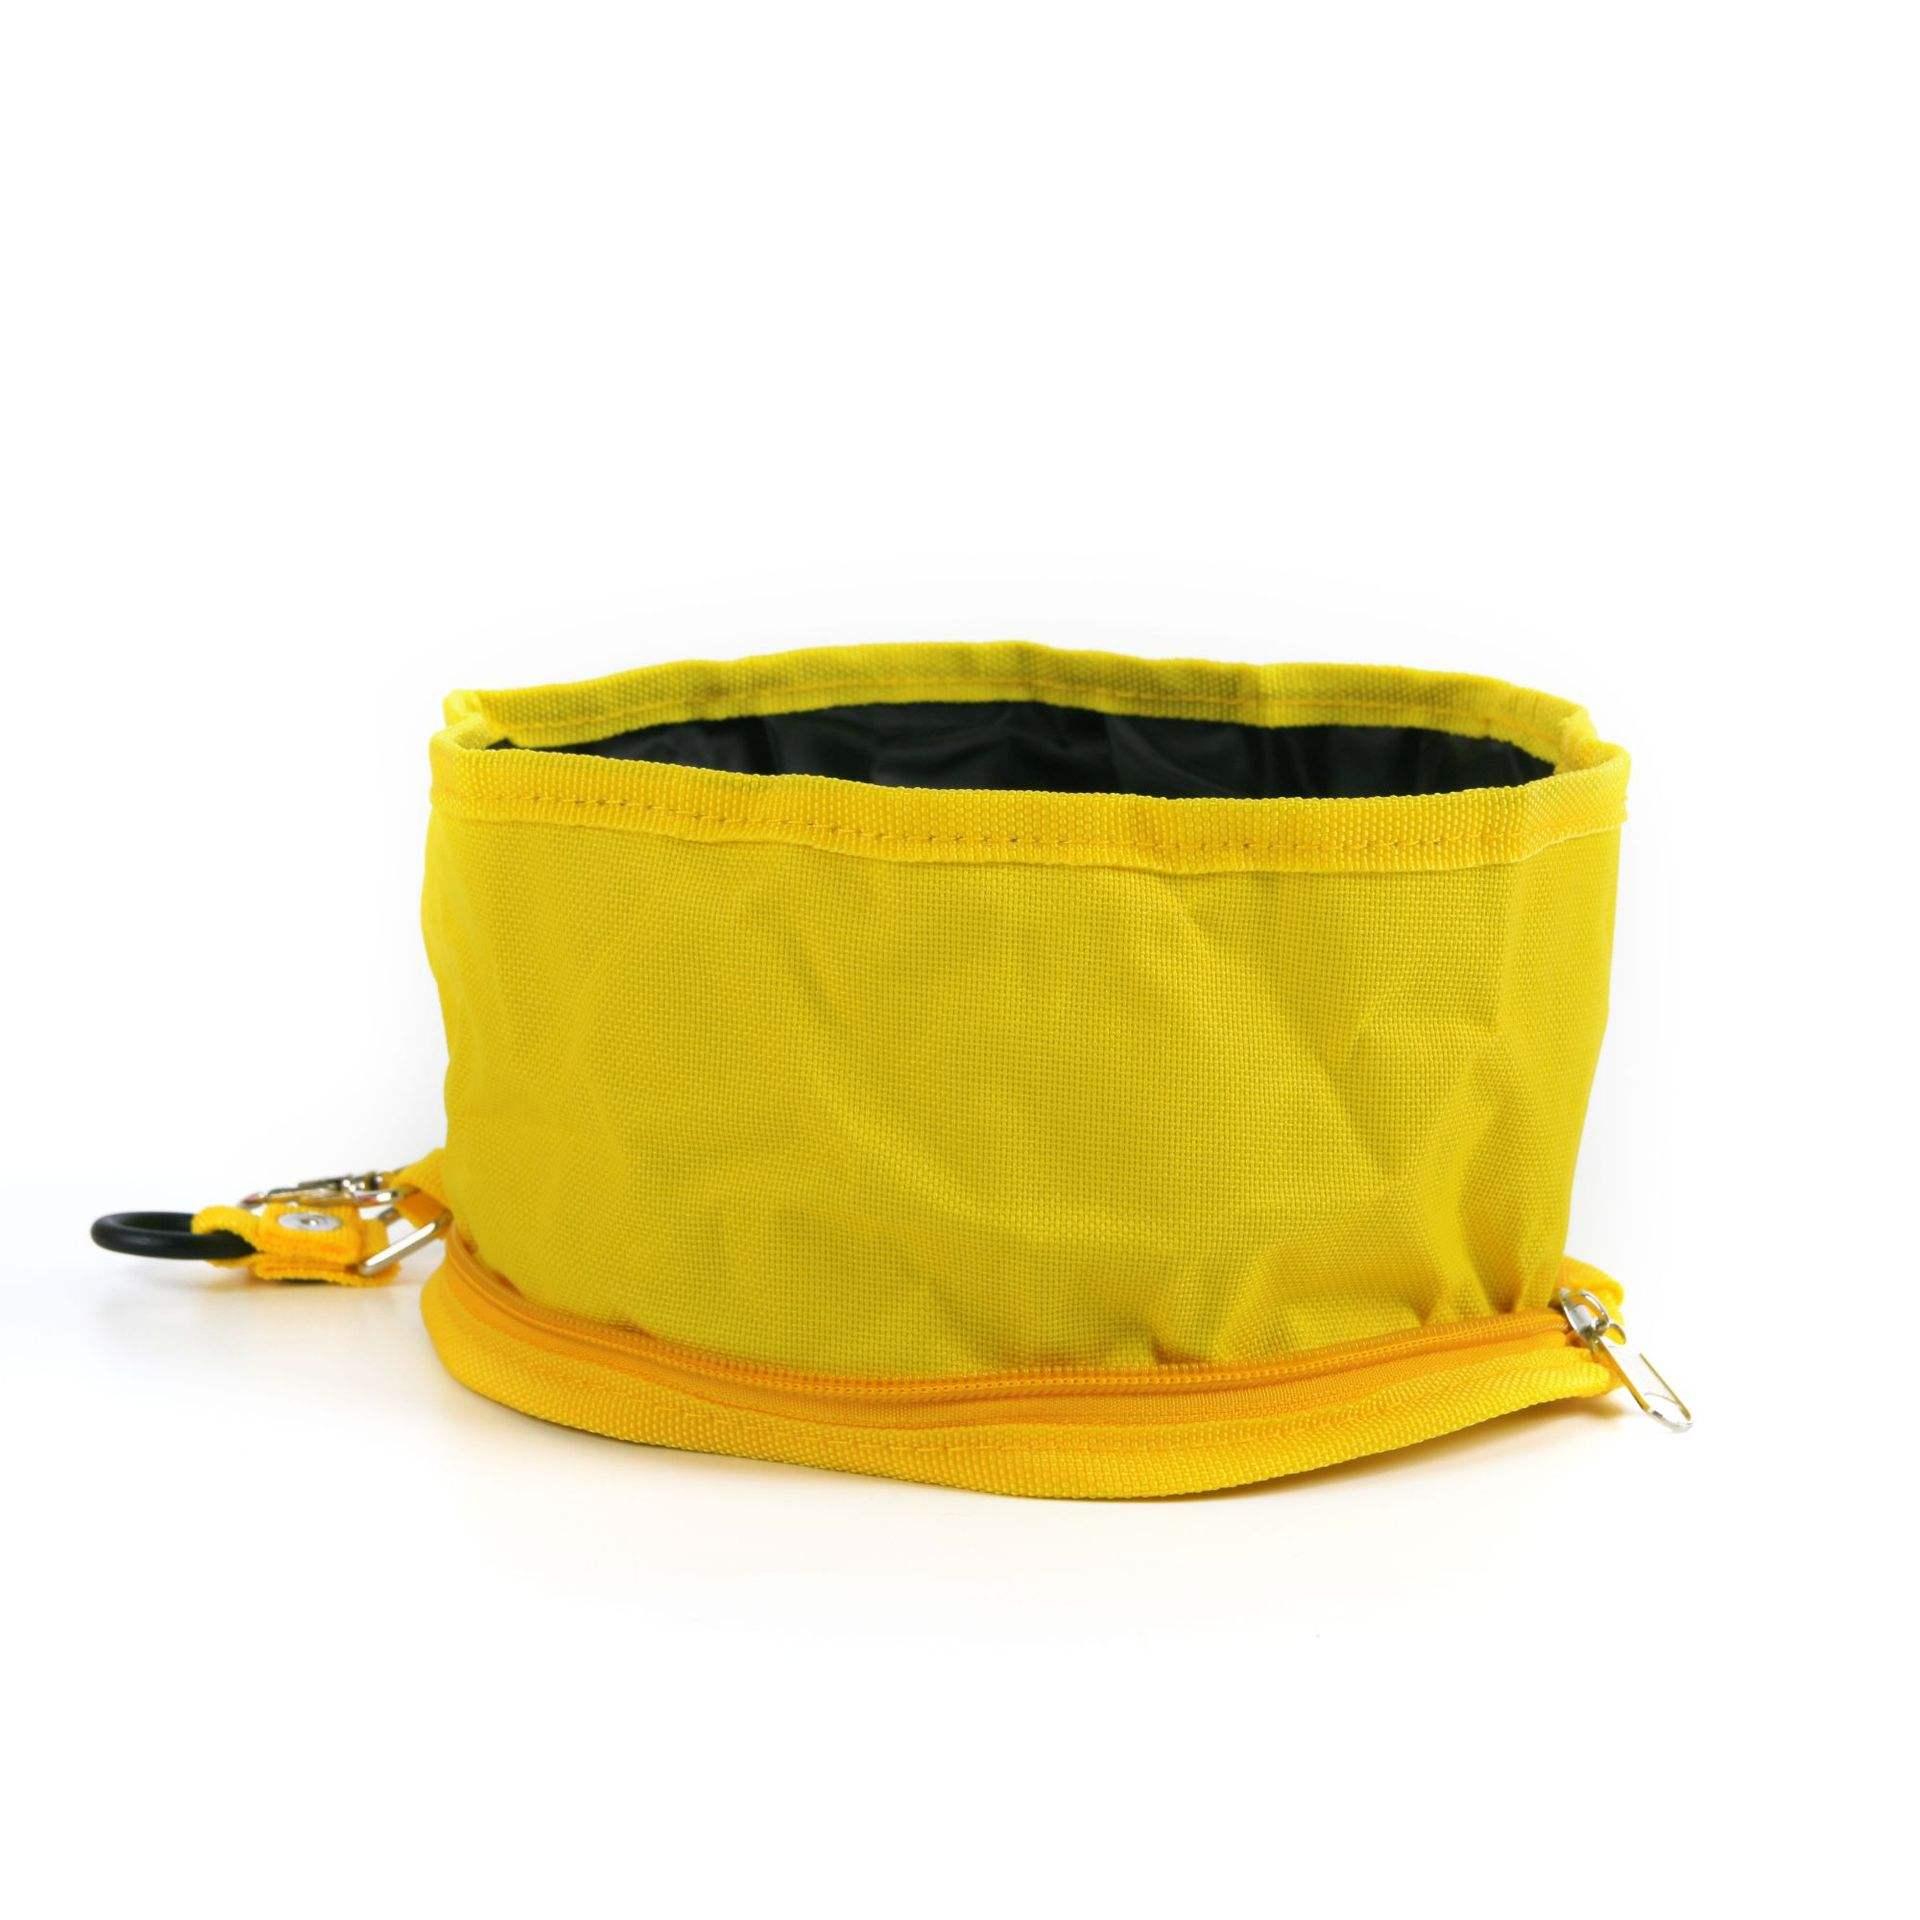 New Arrive Travel Collapsible Portable Waterproof Dog Bowl